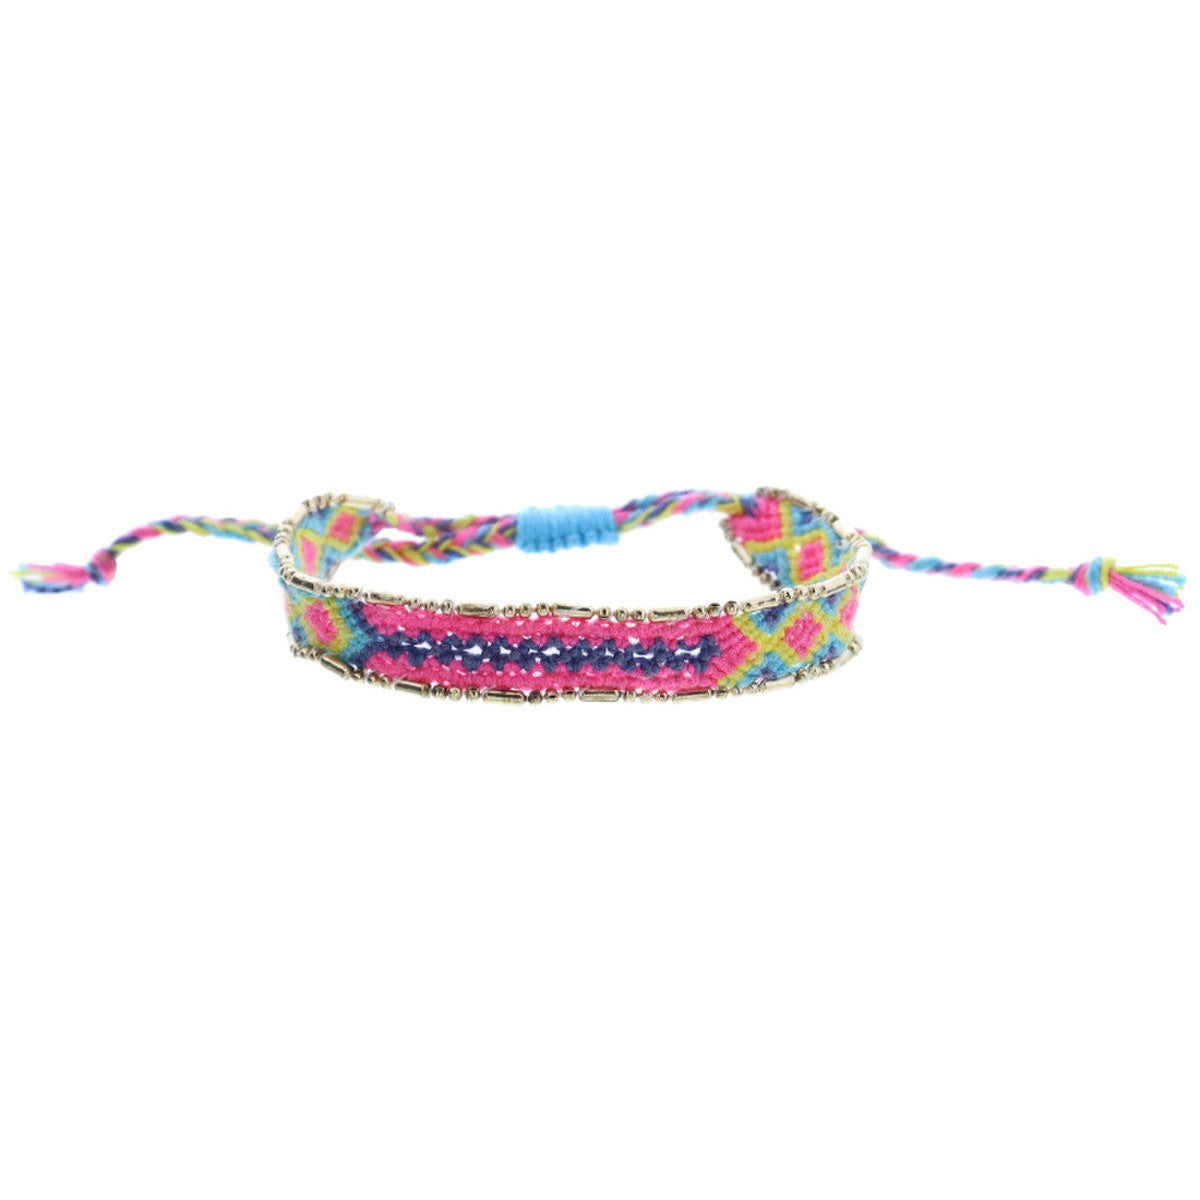 Jane Marie Kids Hot Pink, Lime, Aqua, Navy Woven Band With Gold Accent Edge Bracelet-JANE MARIE-Little Giant Kidz